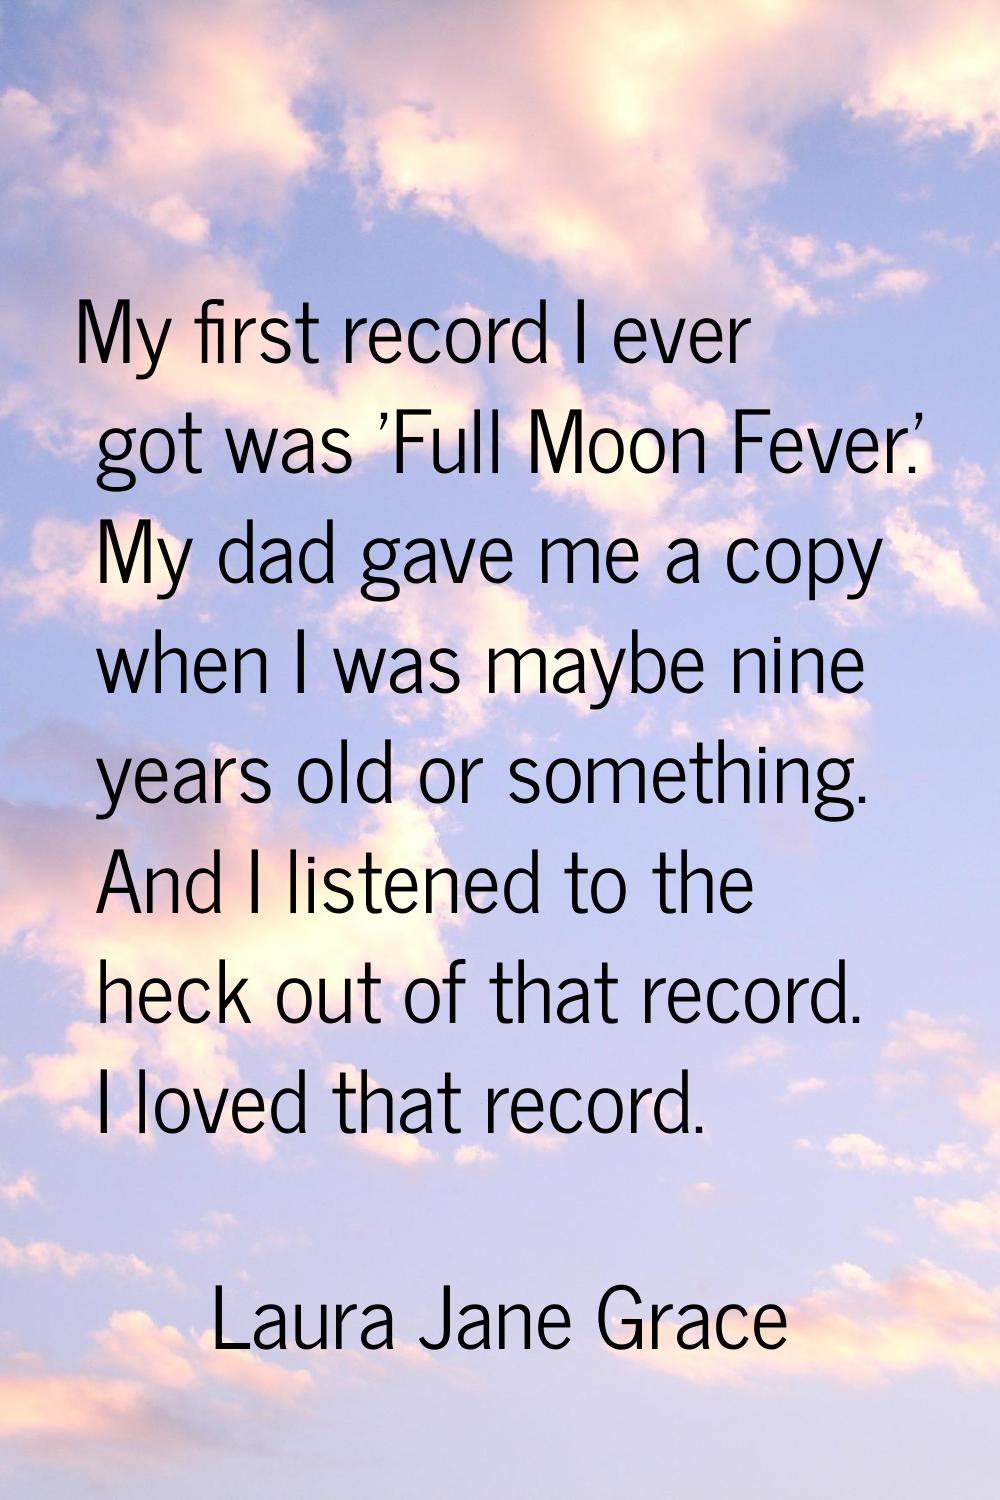 My first record I ever got was 'Full Moon Fever.' My dad gave me a copy when I was maybe nine years